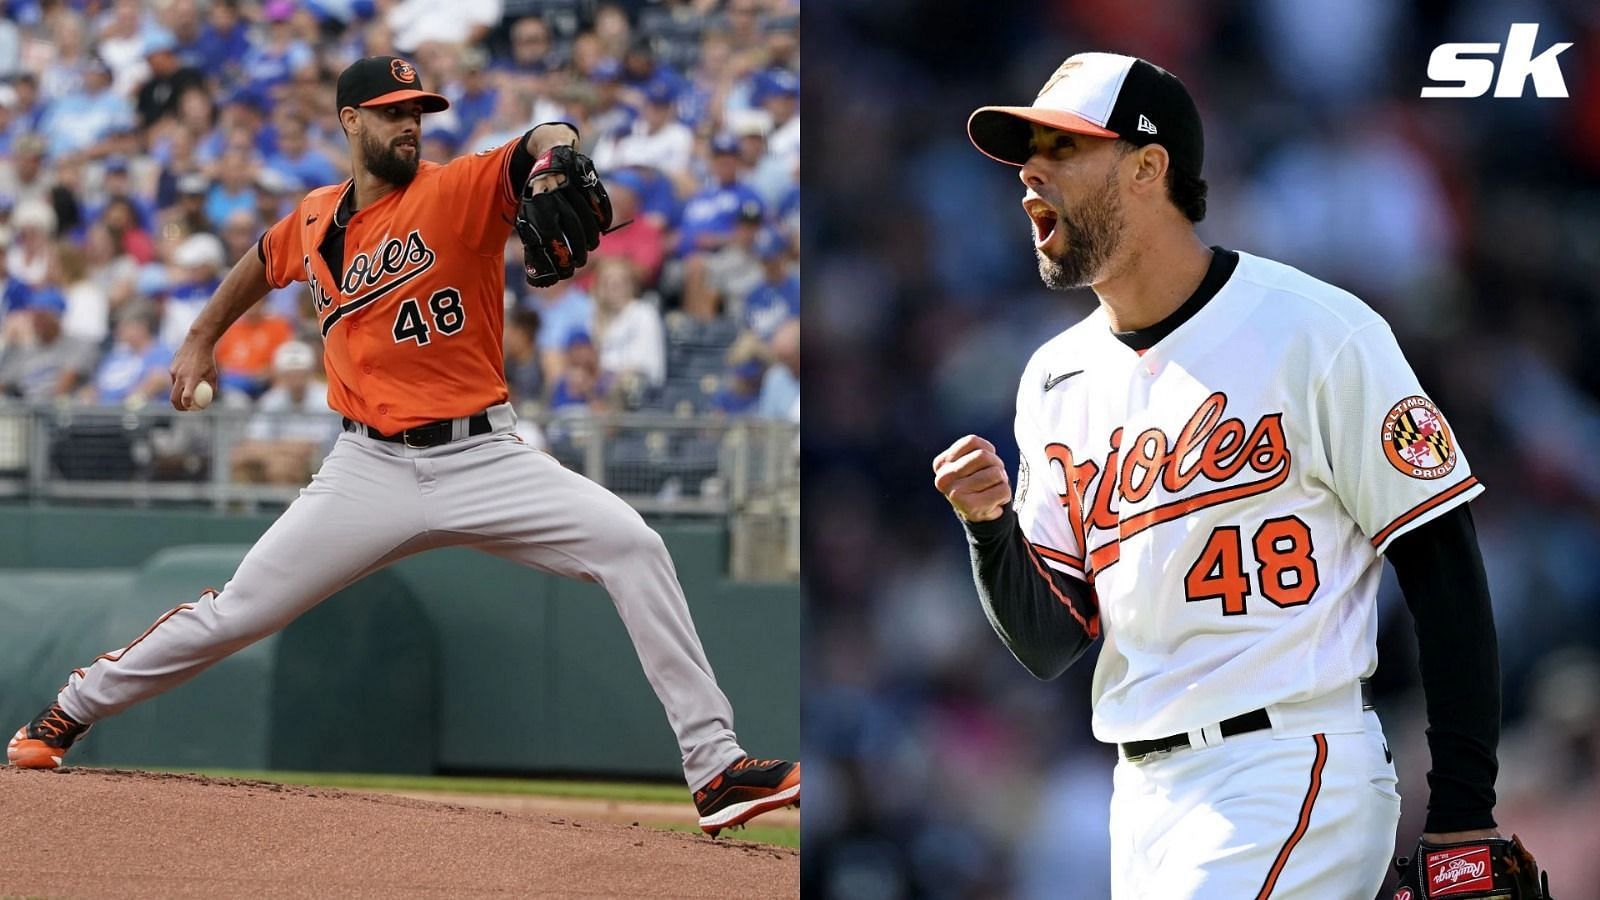 Jorge L&oacute;pez makes his way back to the Orioles